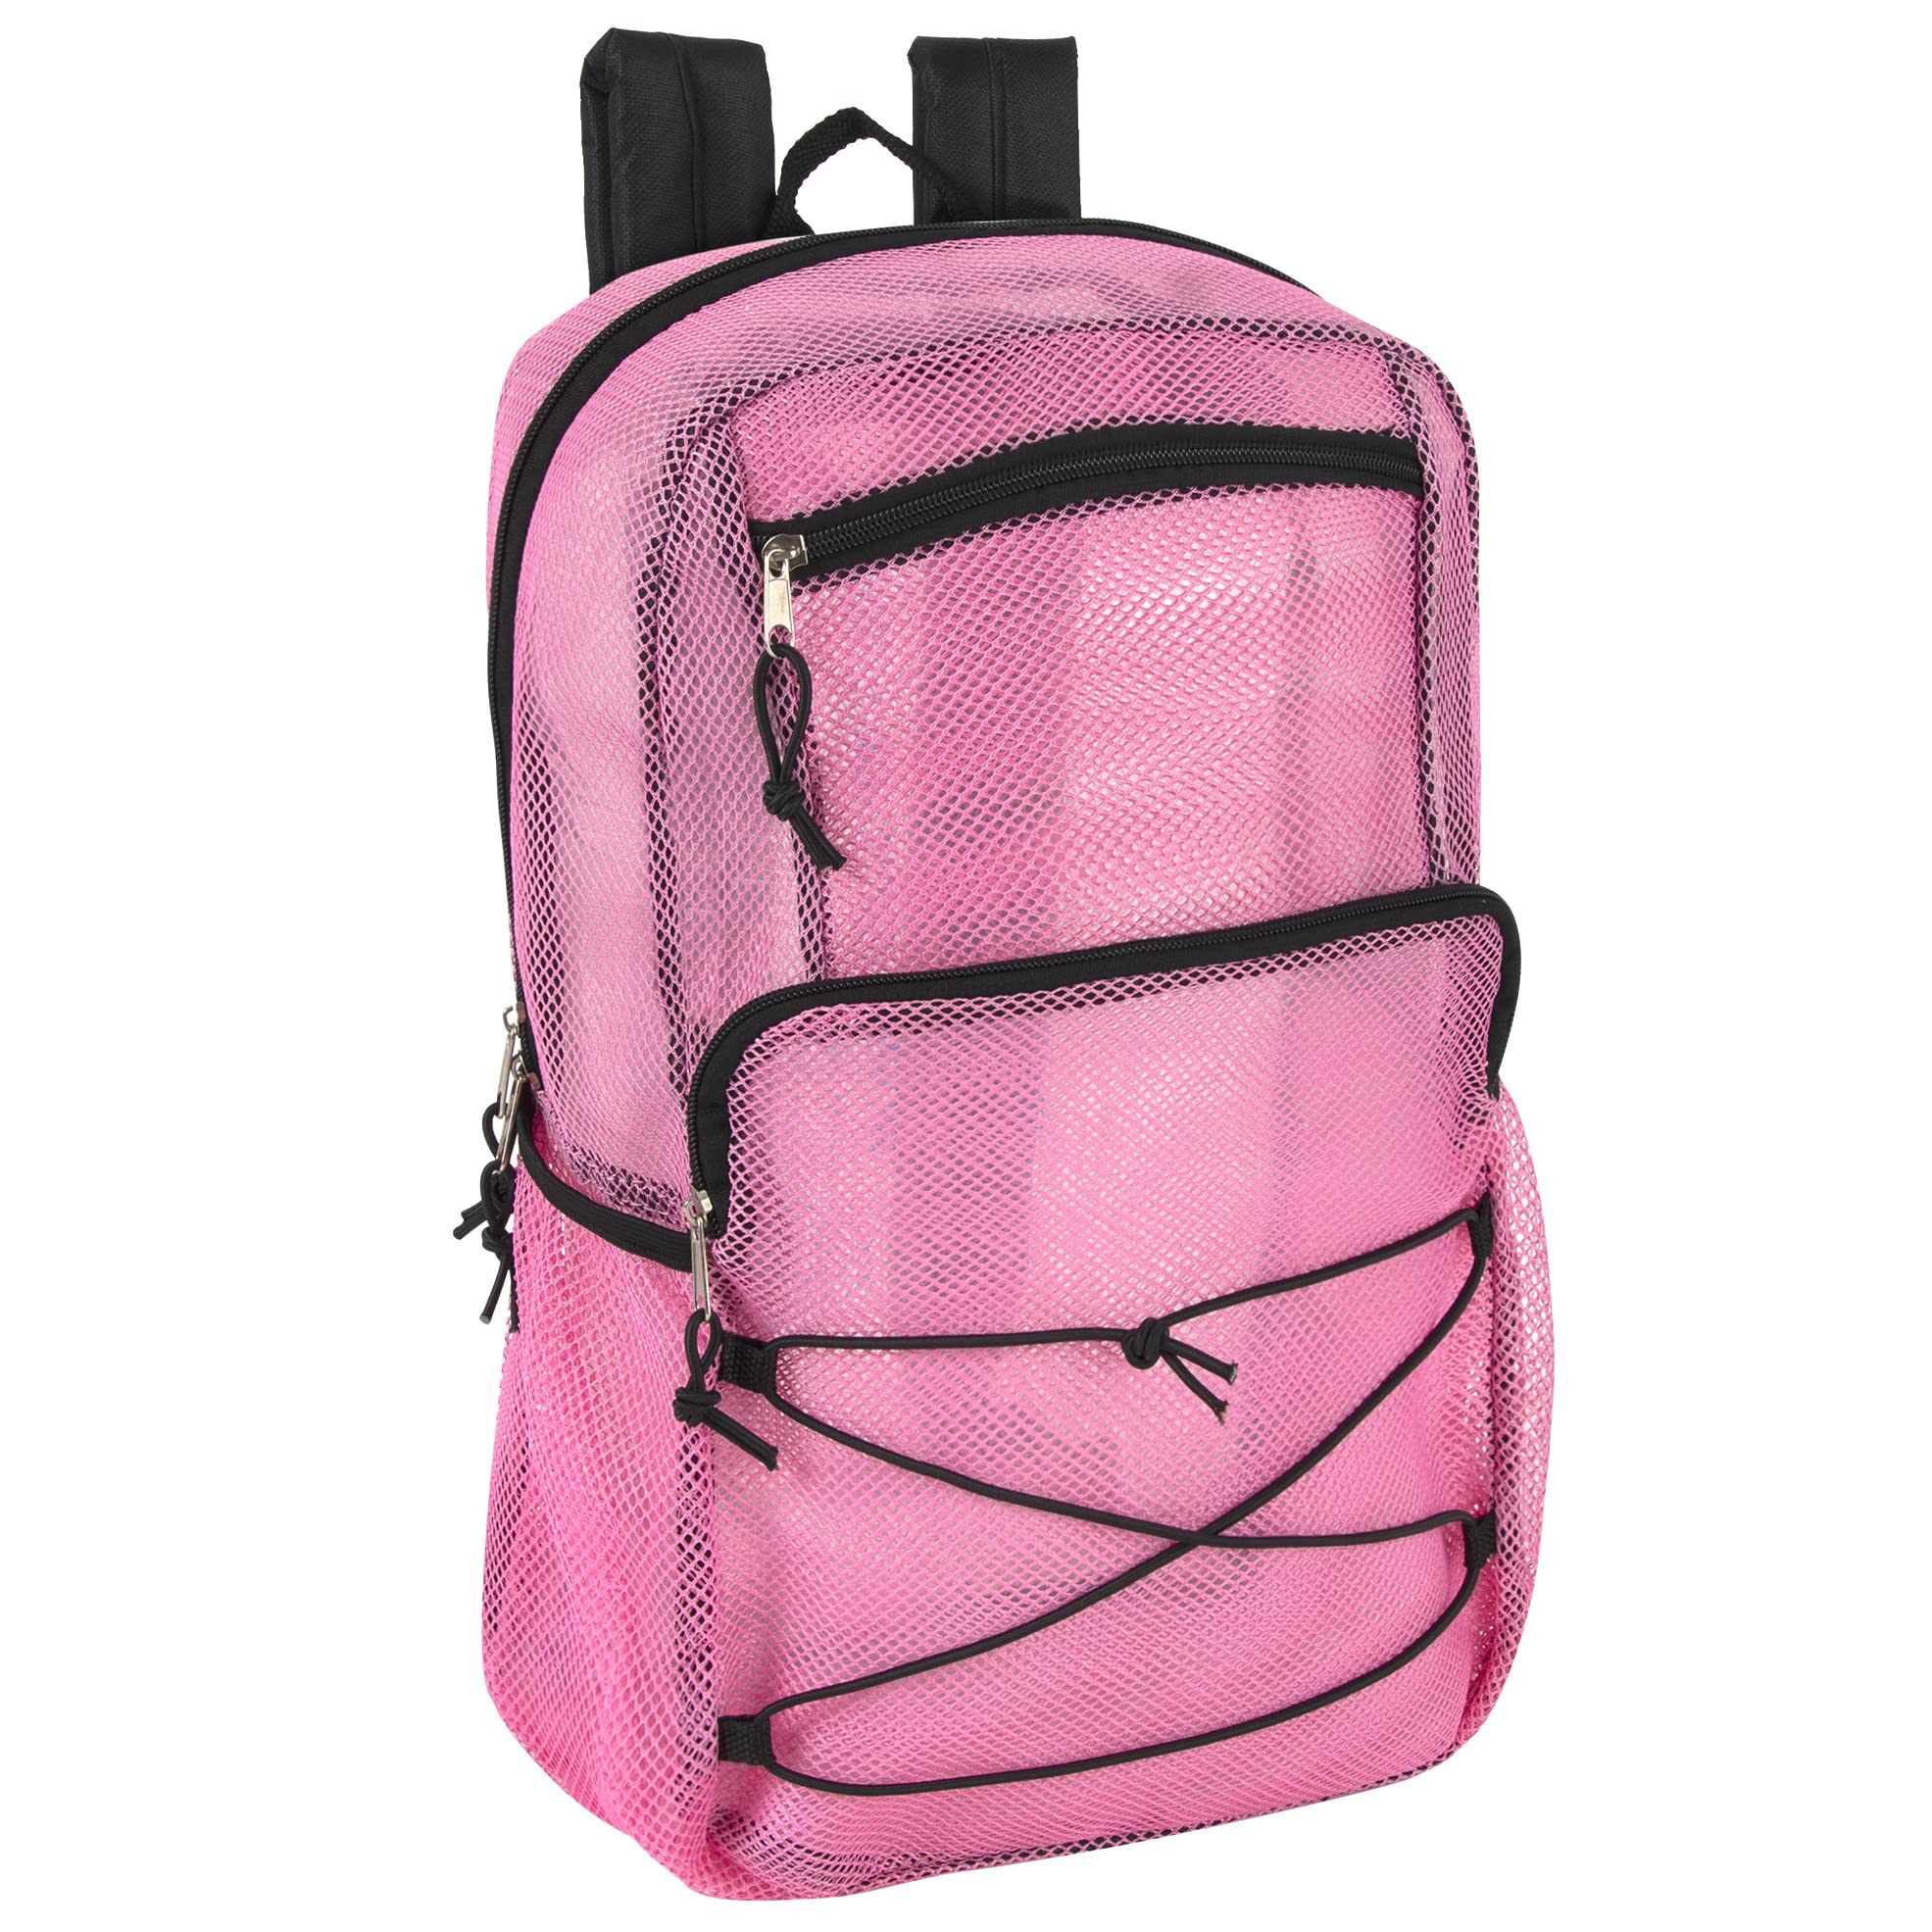 Trailmaker Deluxe See Through Mesh Backpack with Bungee Cord & Adjustable Padded Straps for Swimming, Travel (Pink)